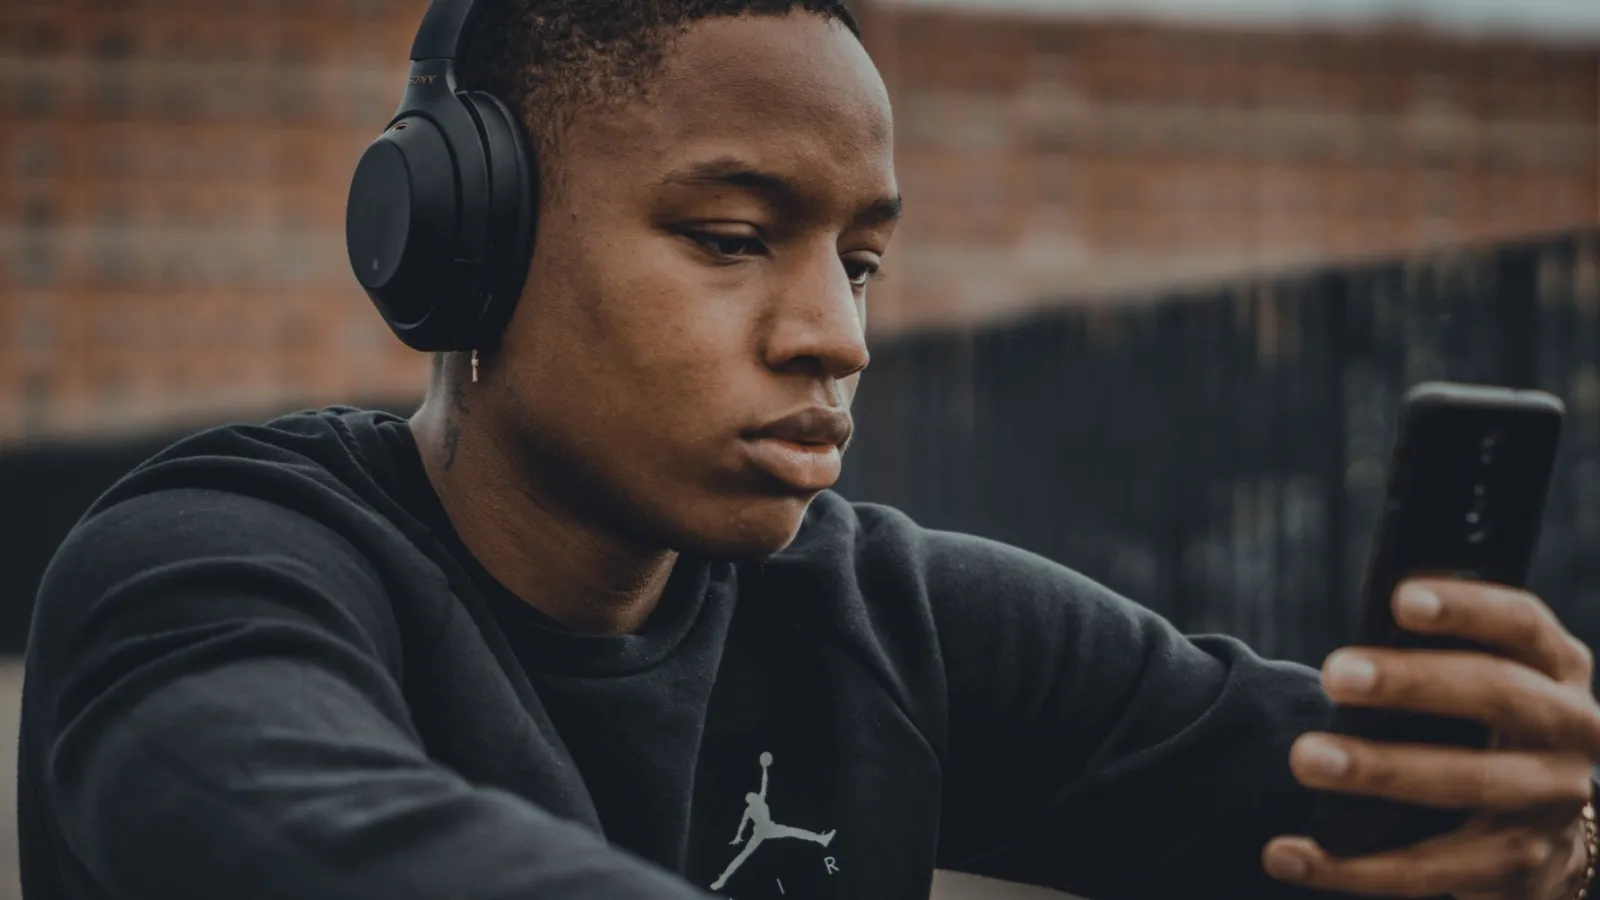 a man wearing headphones and holding a phone